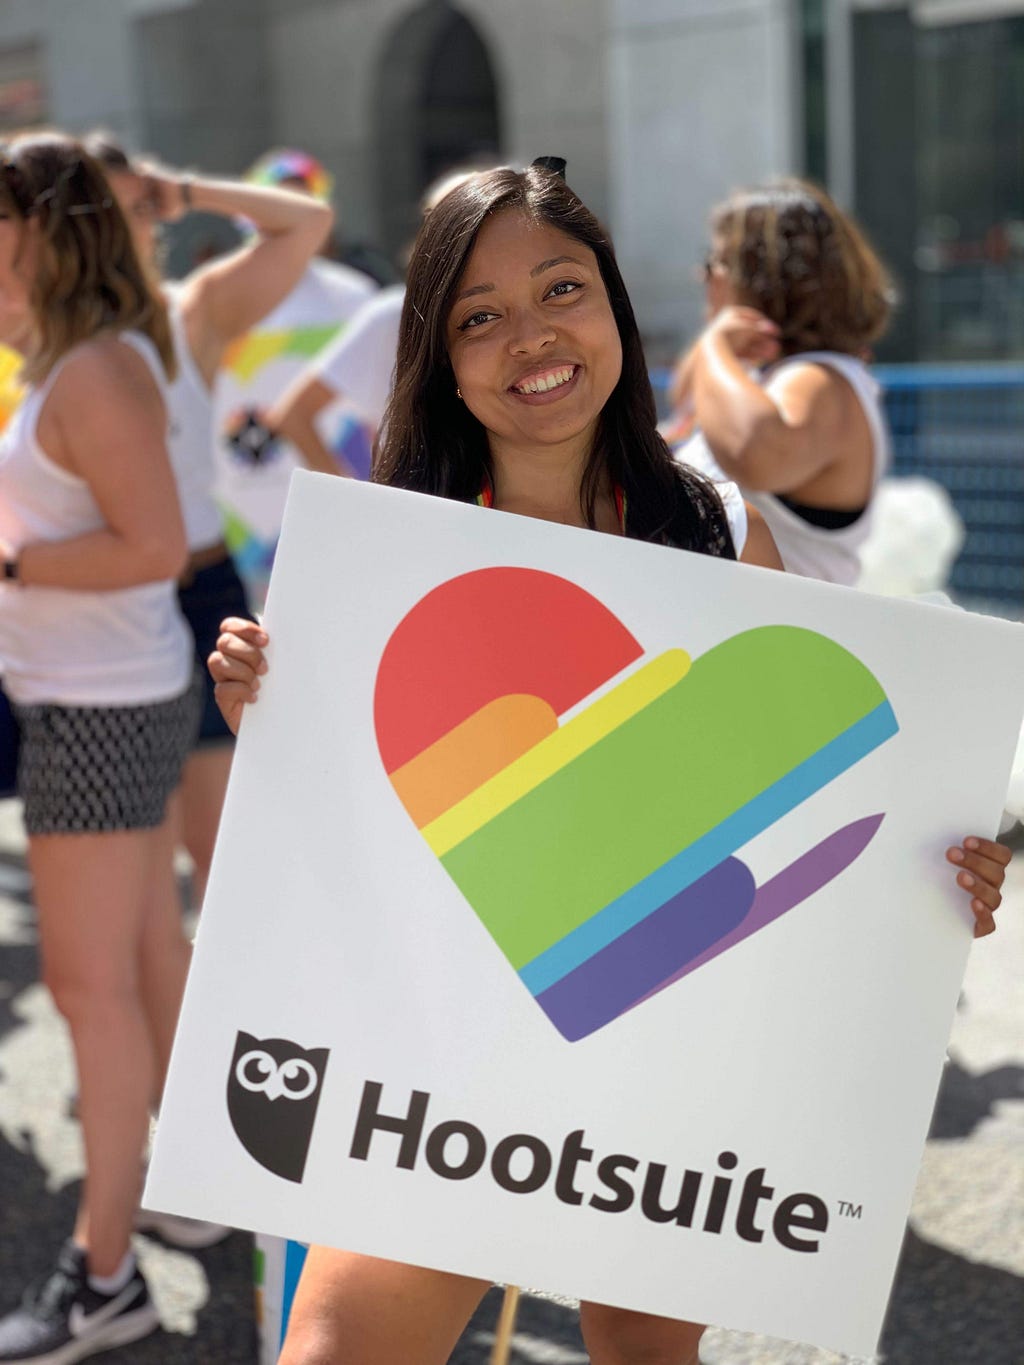 Repping Hootsuite at the Pride Parade